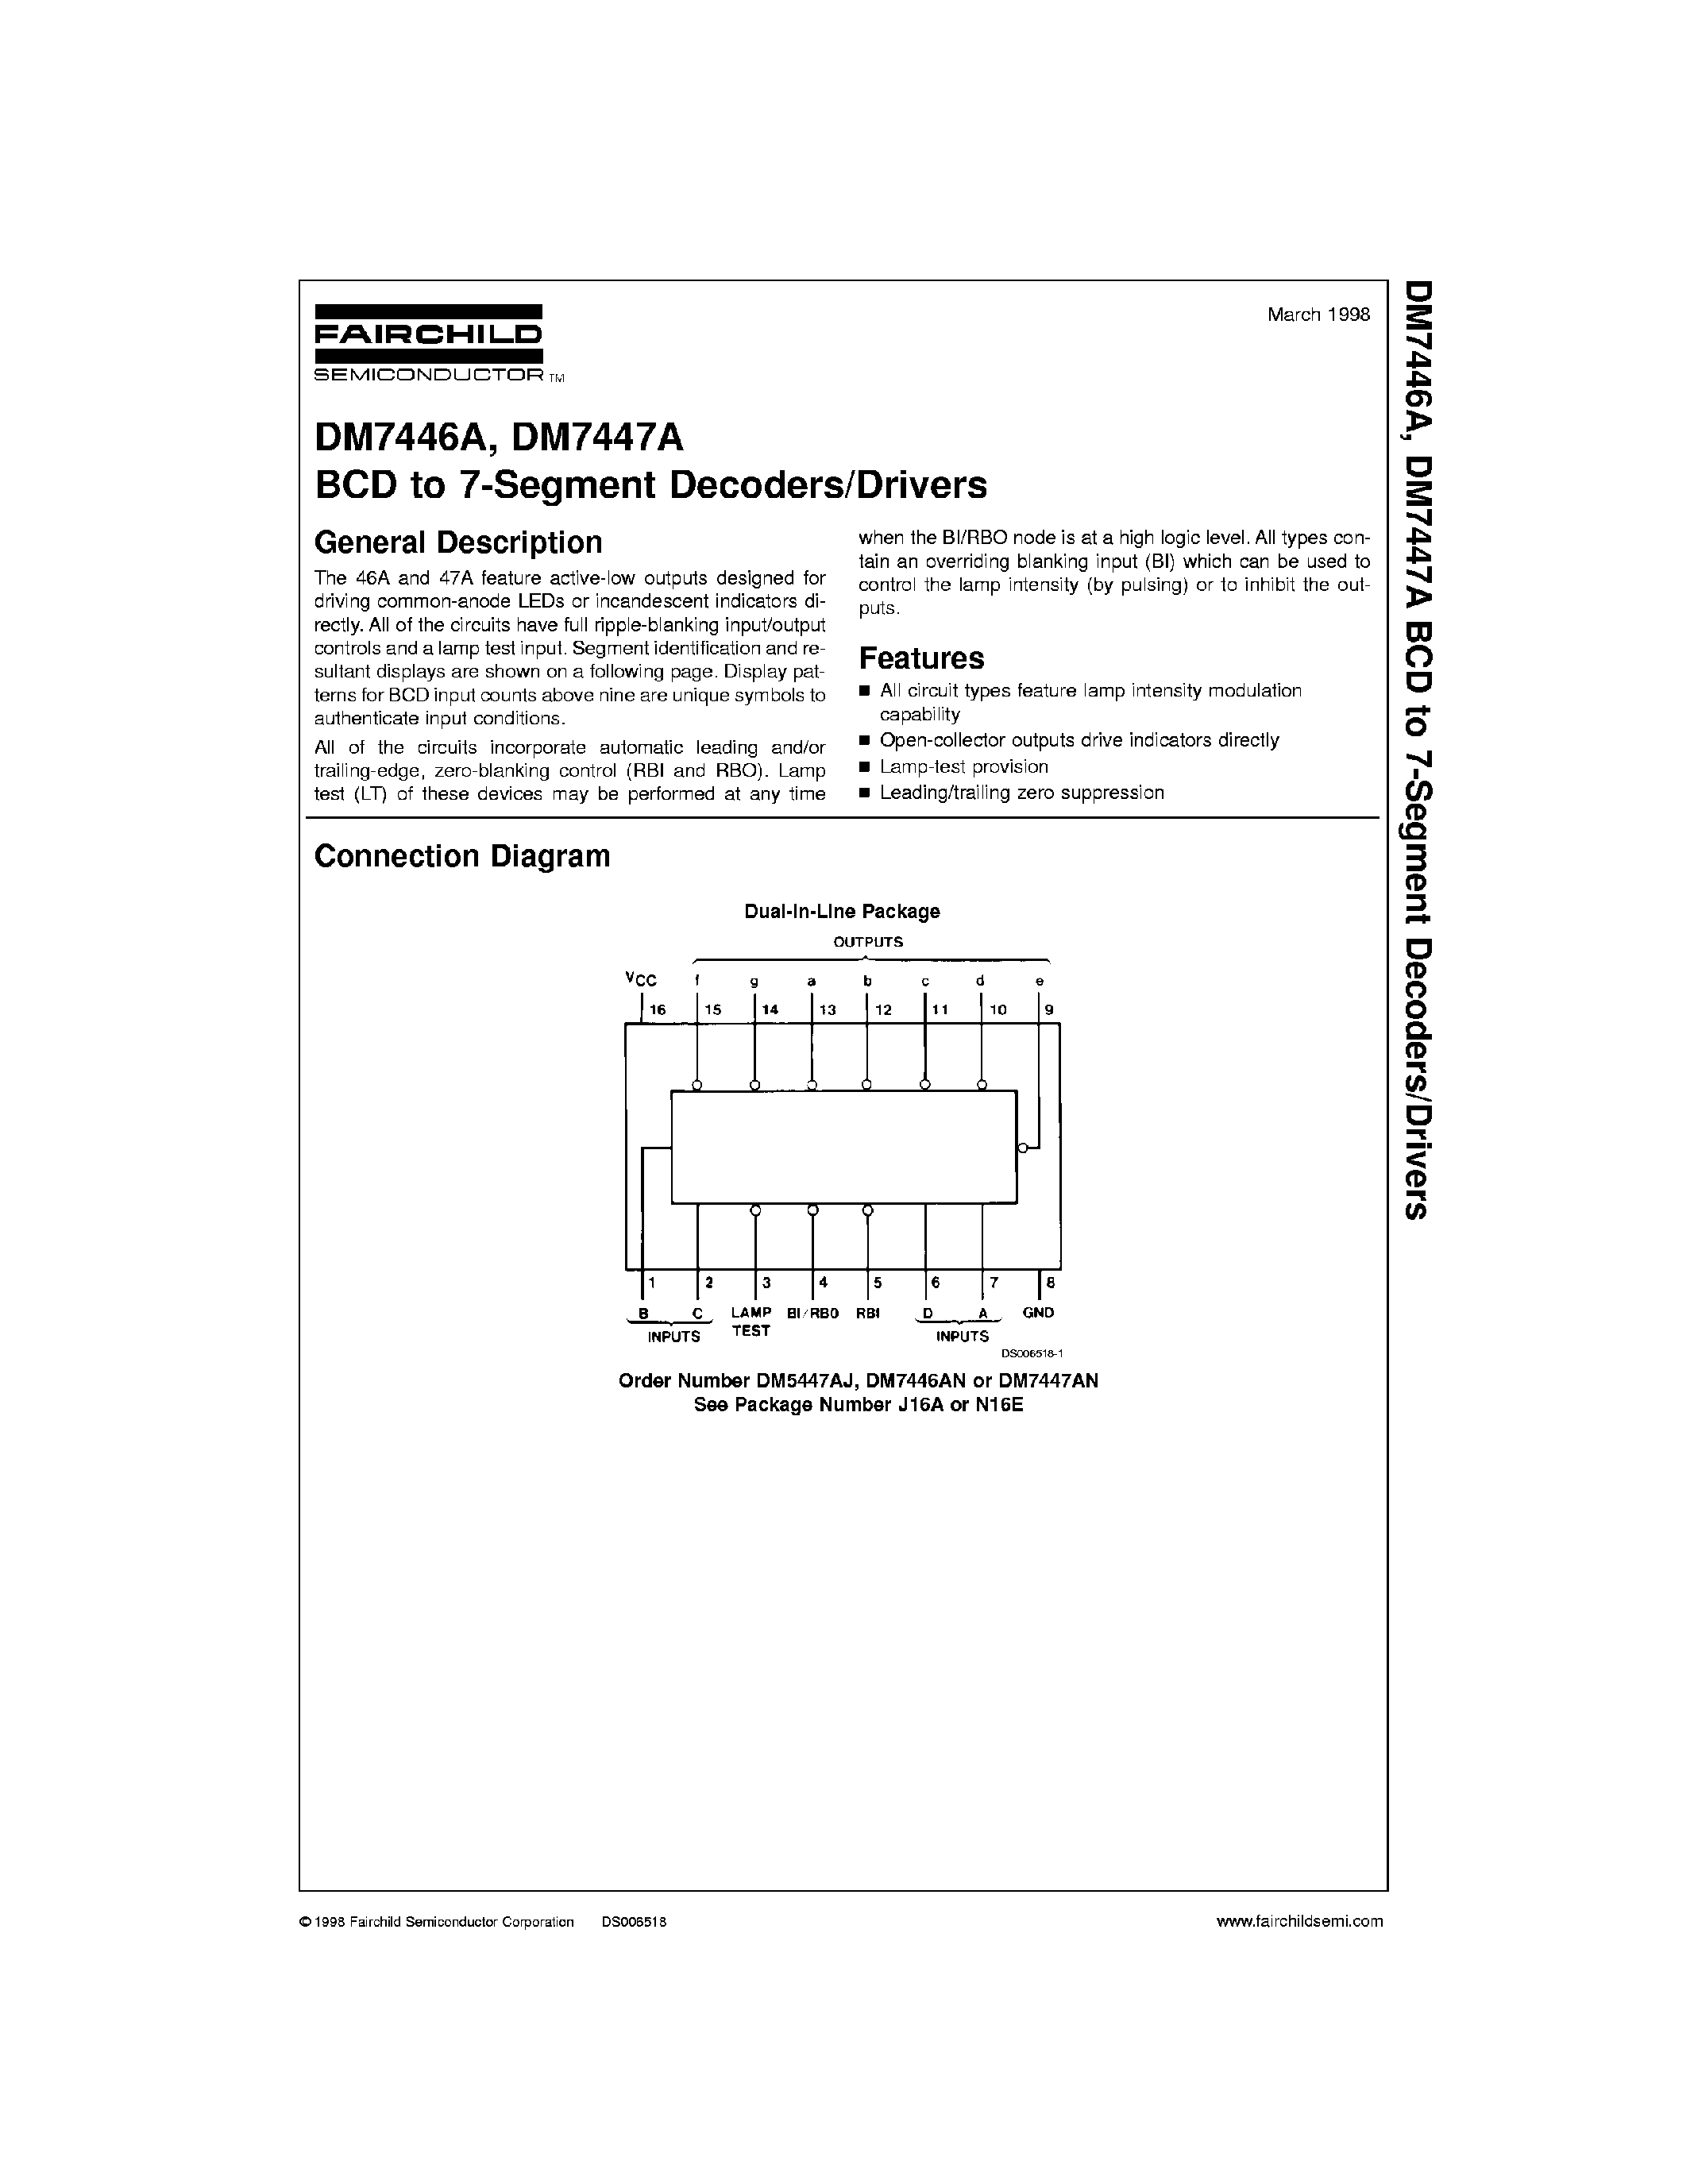 Datasheet 7446A - BCD to 7-Segment Decoders / Drivers page 1